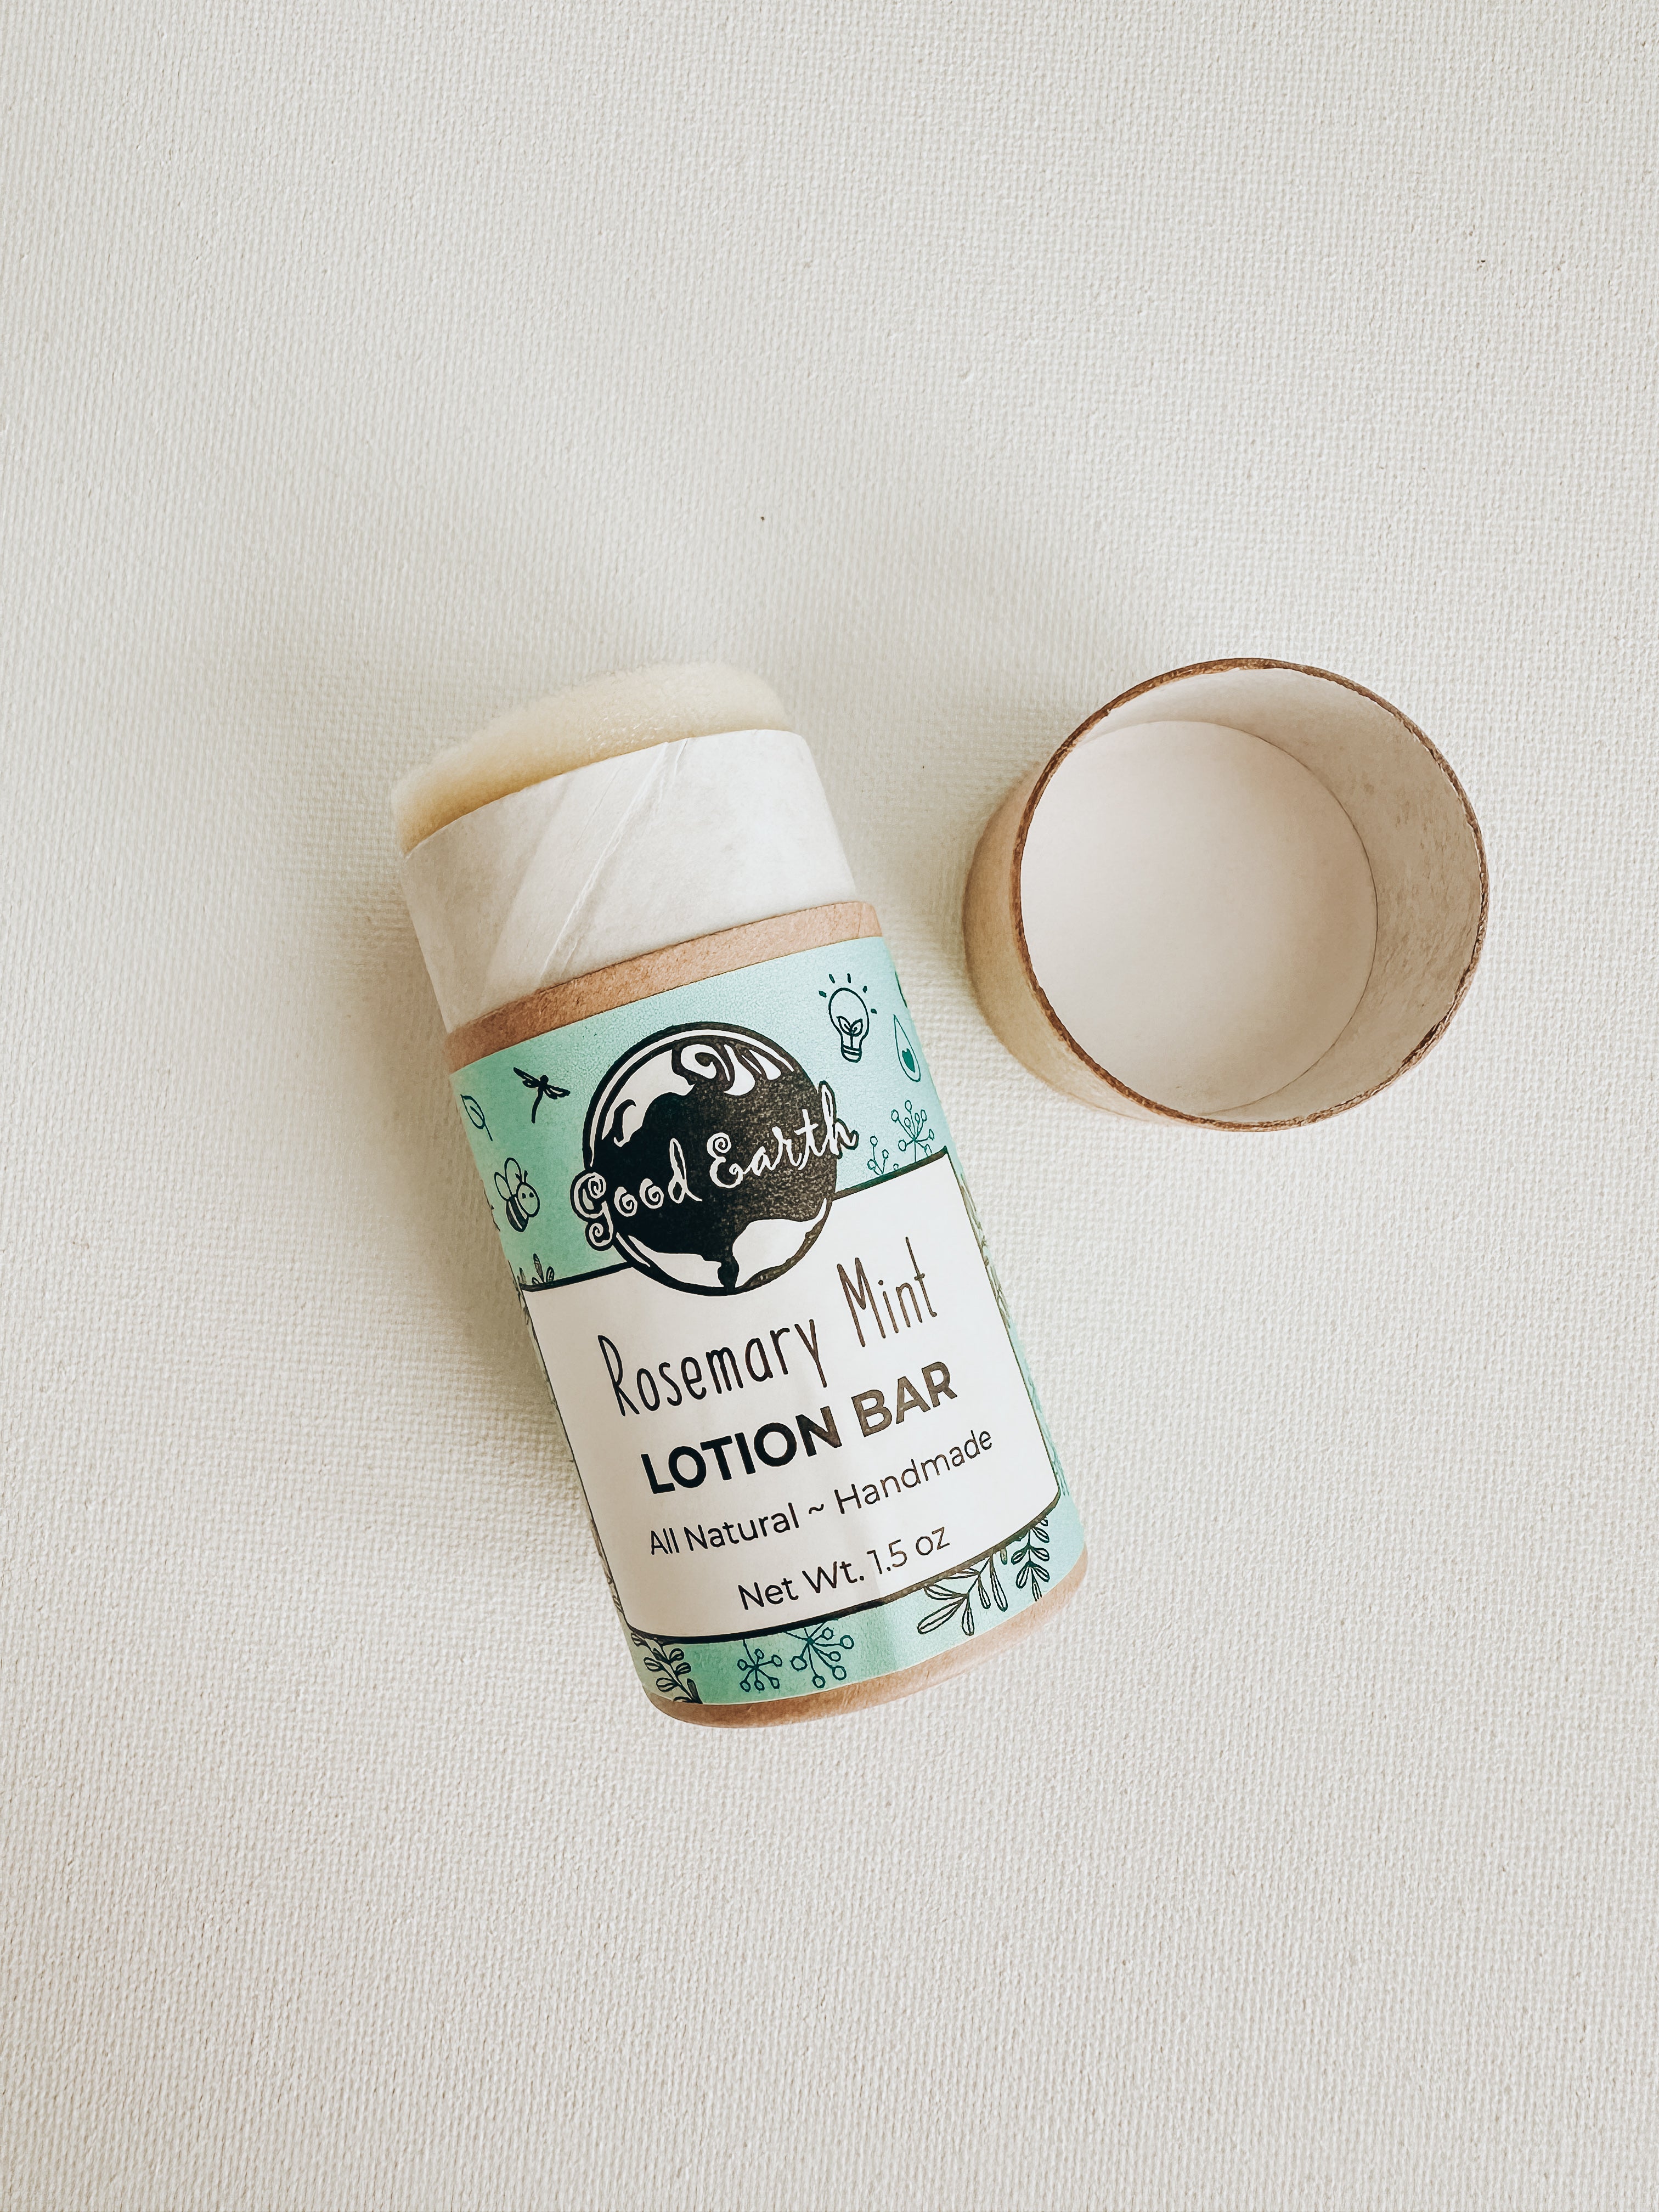 All Natural Hand Lotion Stick